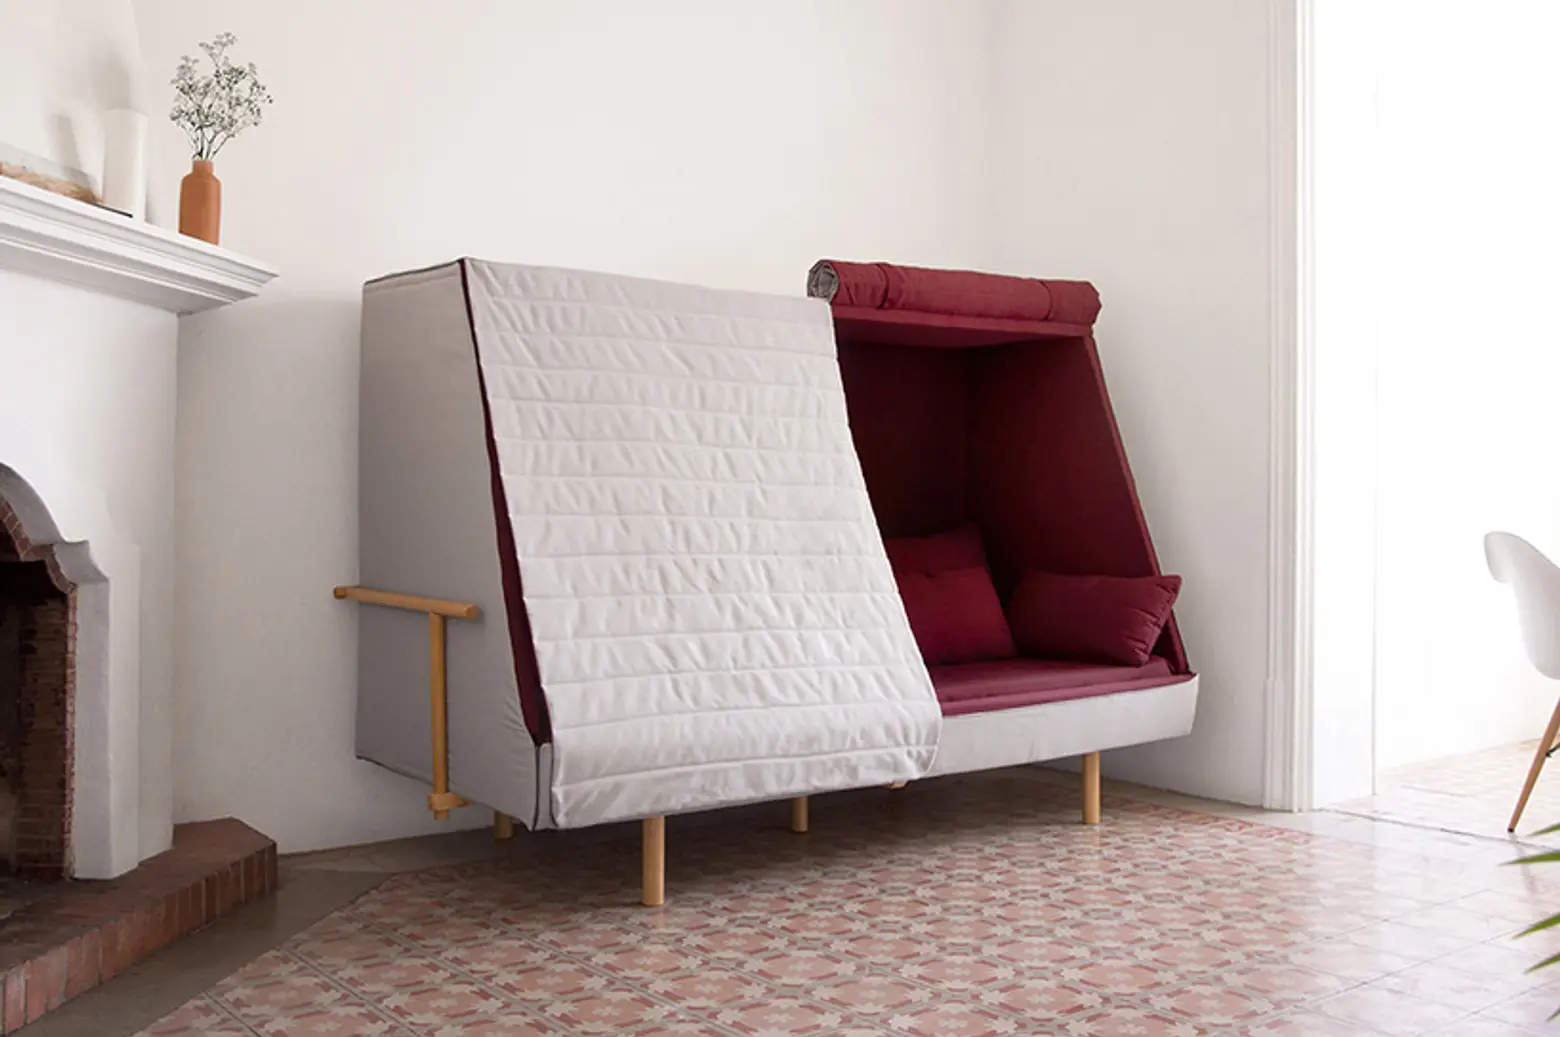 Orwell Hybrid Bed-Sofa-Cabin Recaptures the Intimacy of Home